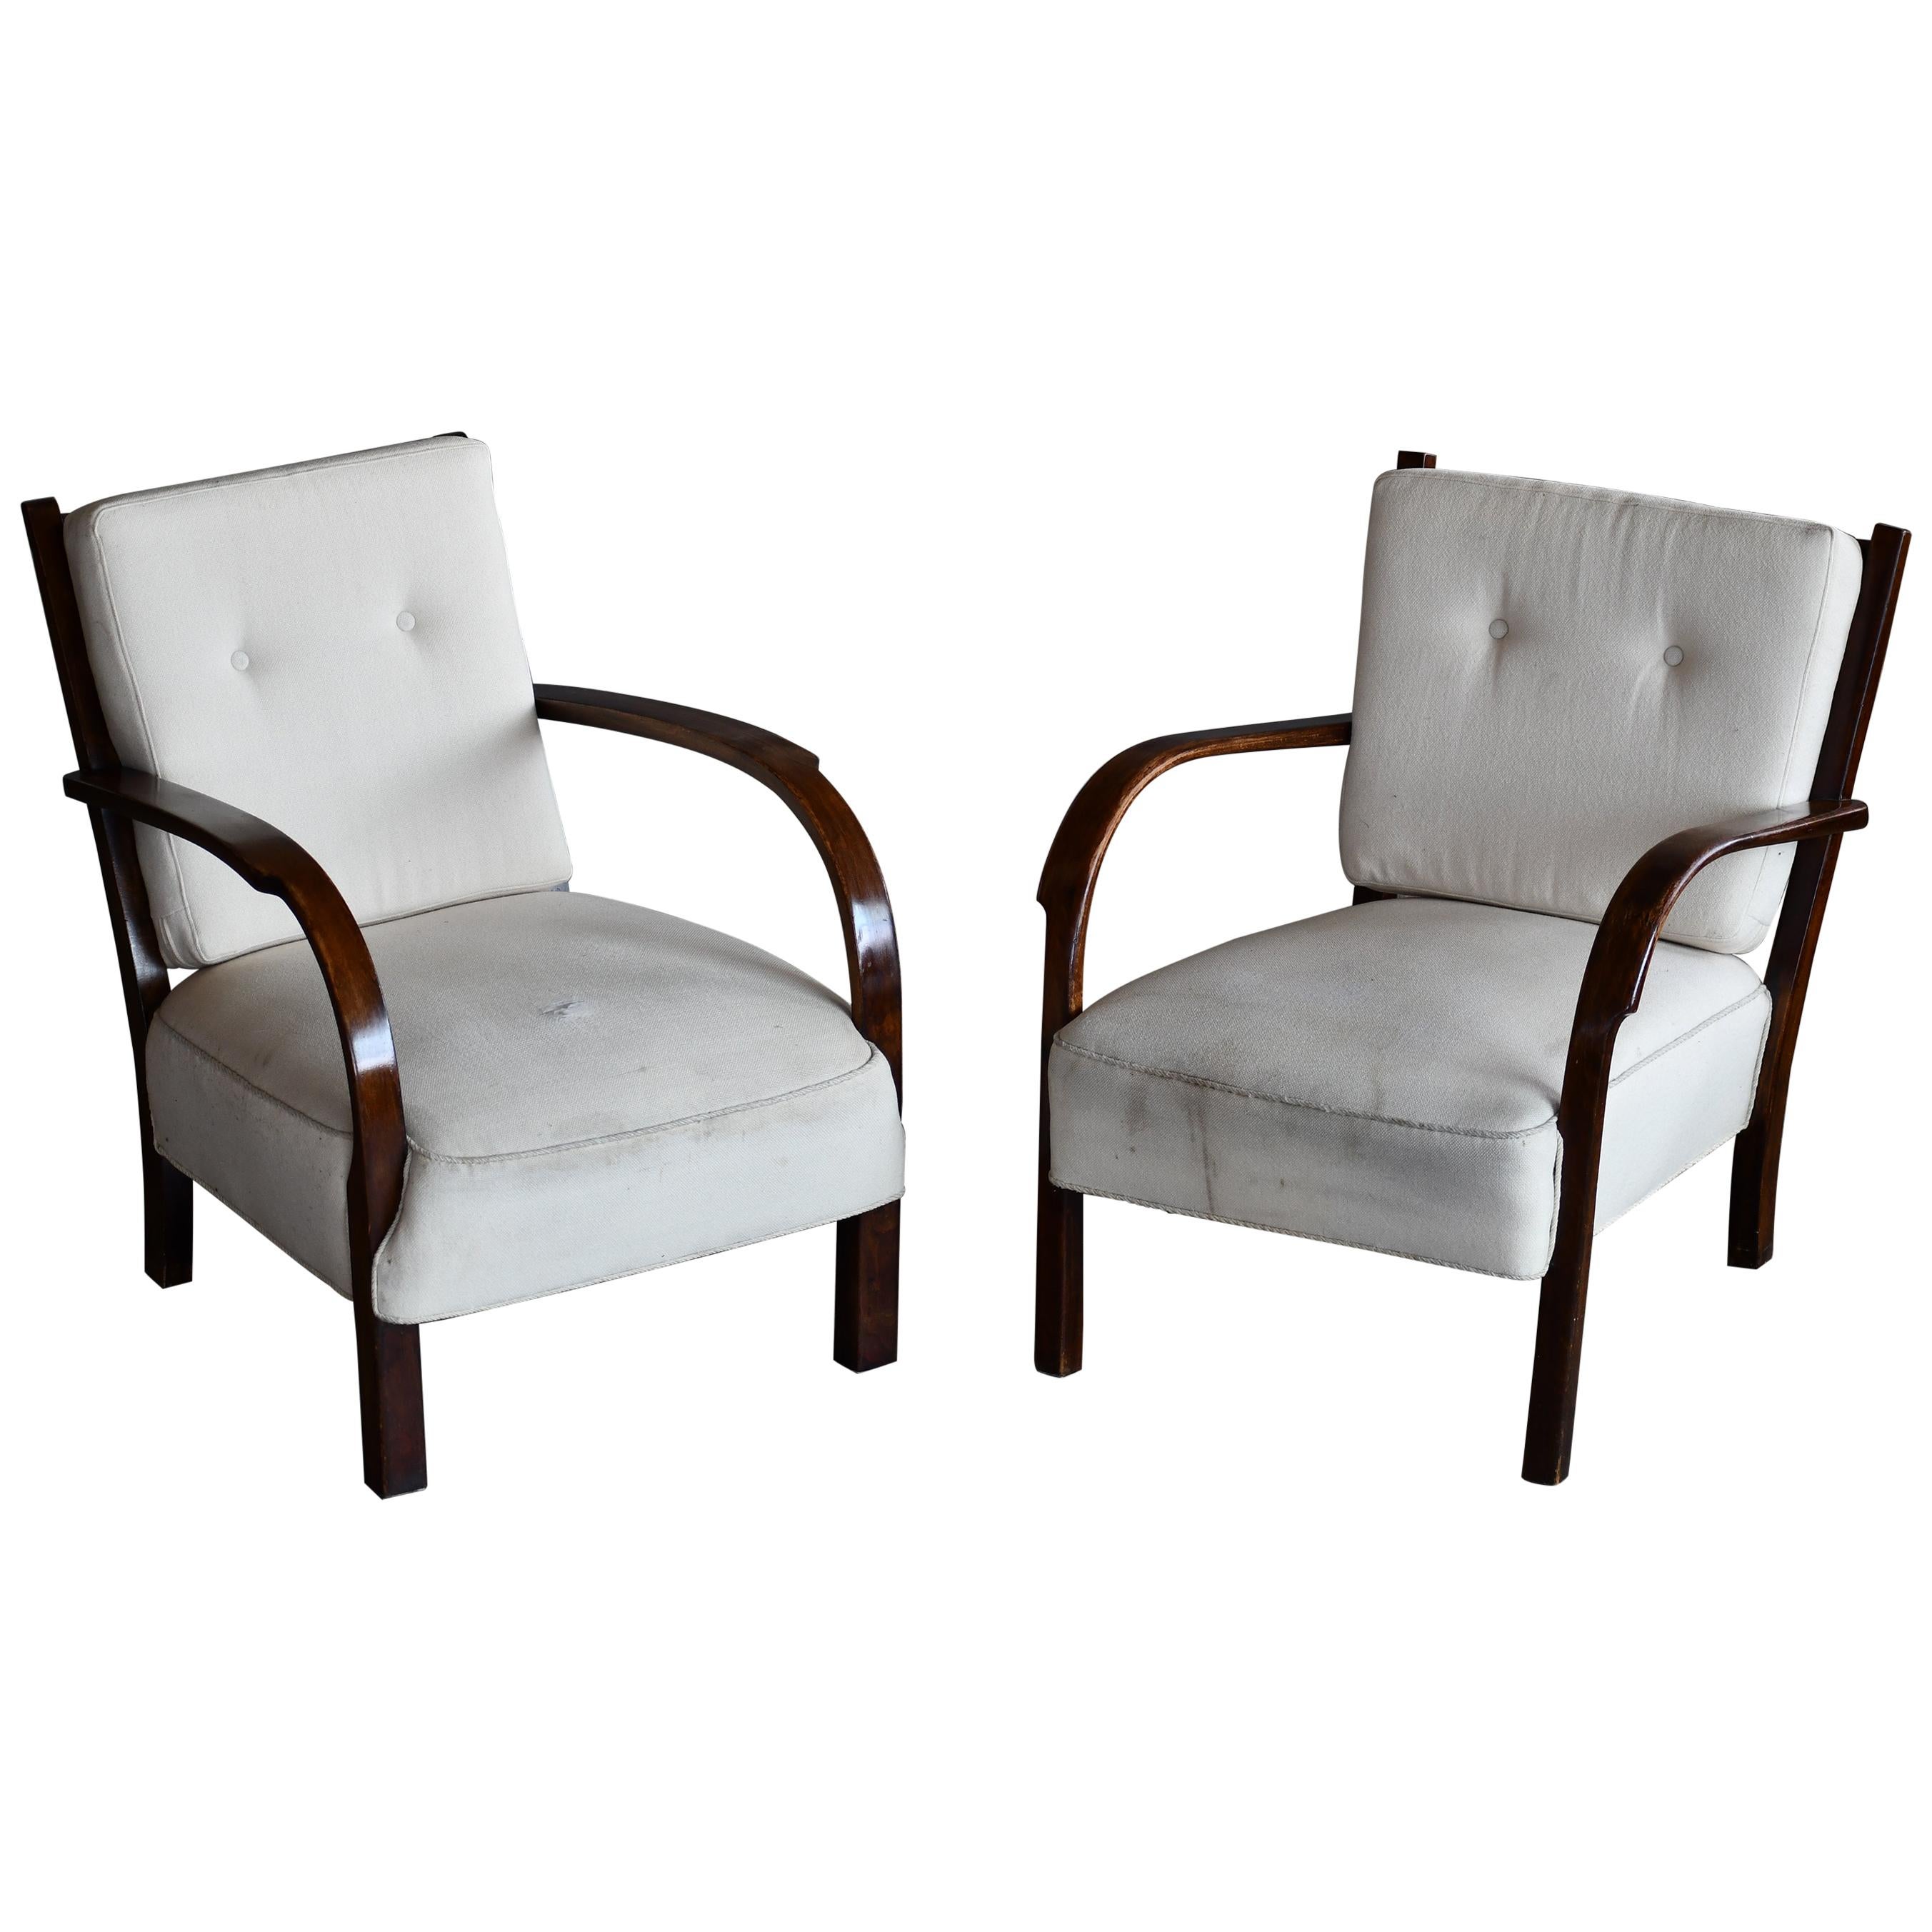 Pair of 1930s-1940s Danish Easy Chairs with Open Armrests by Fritz Hansen